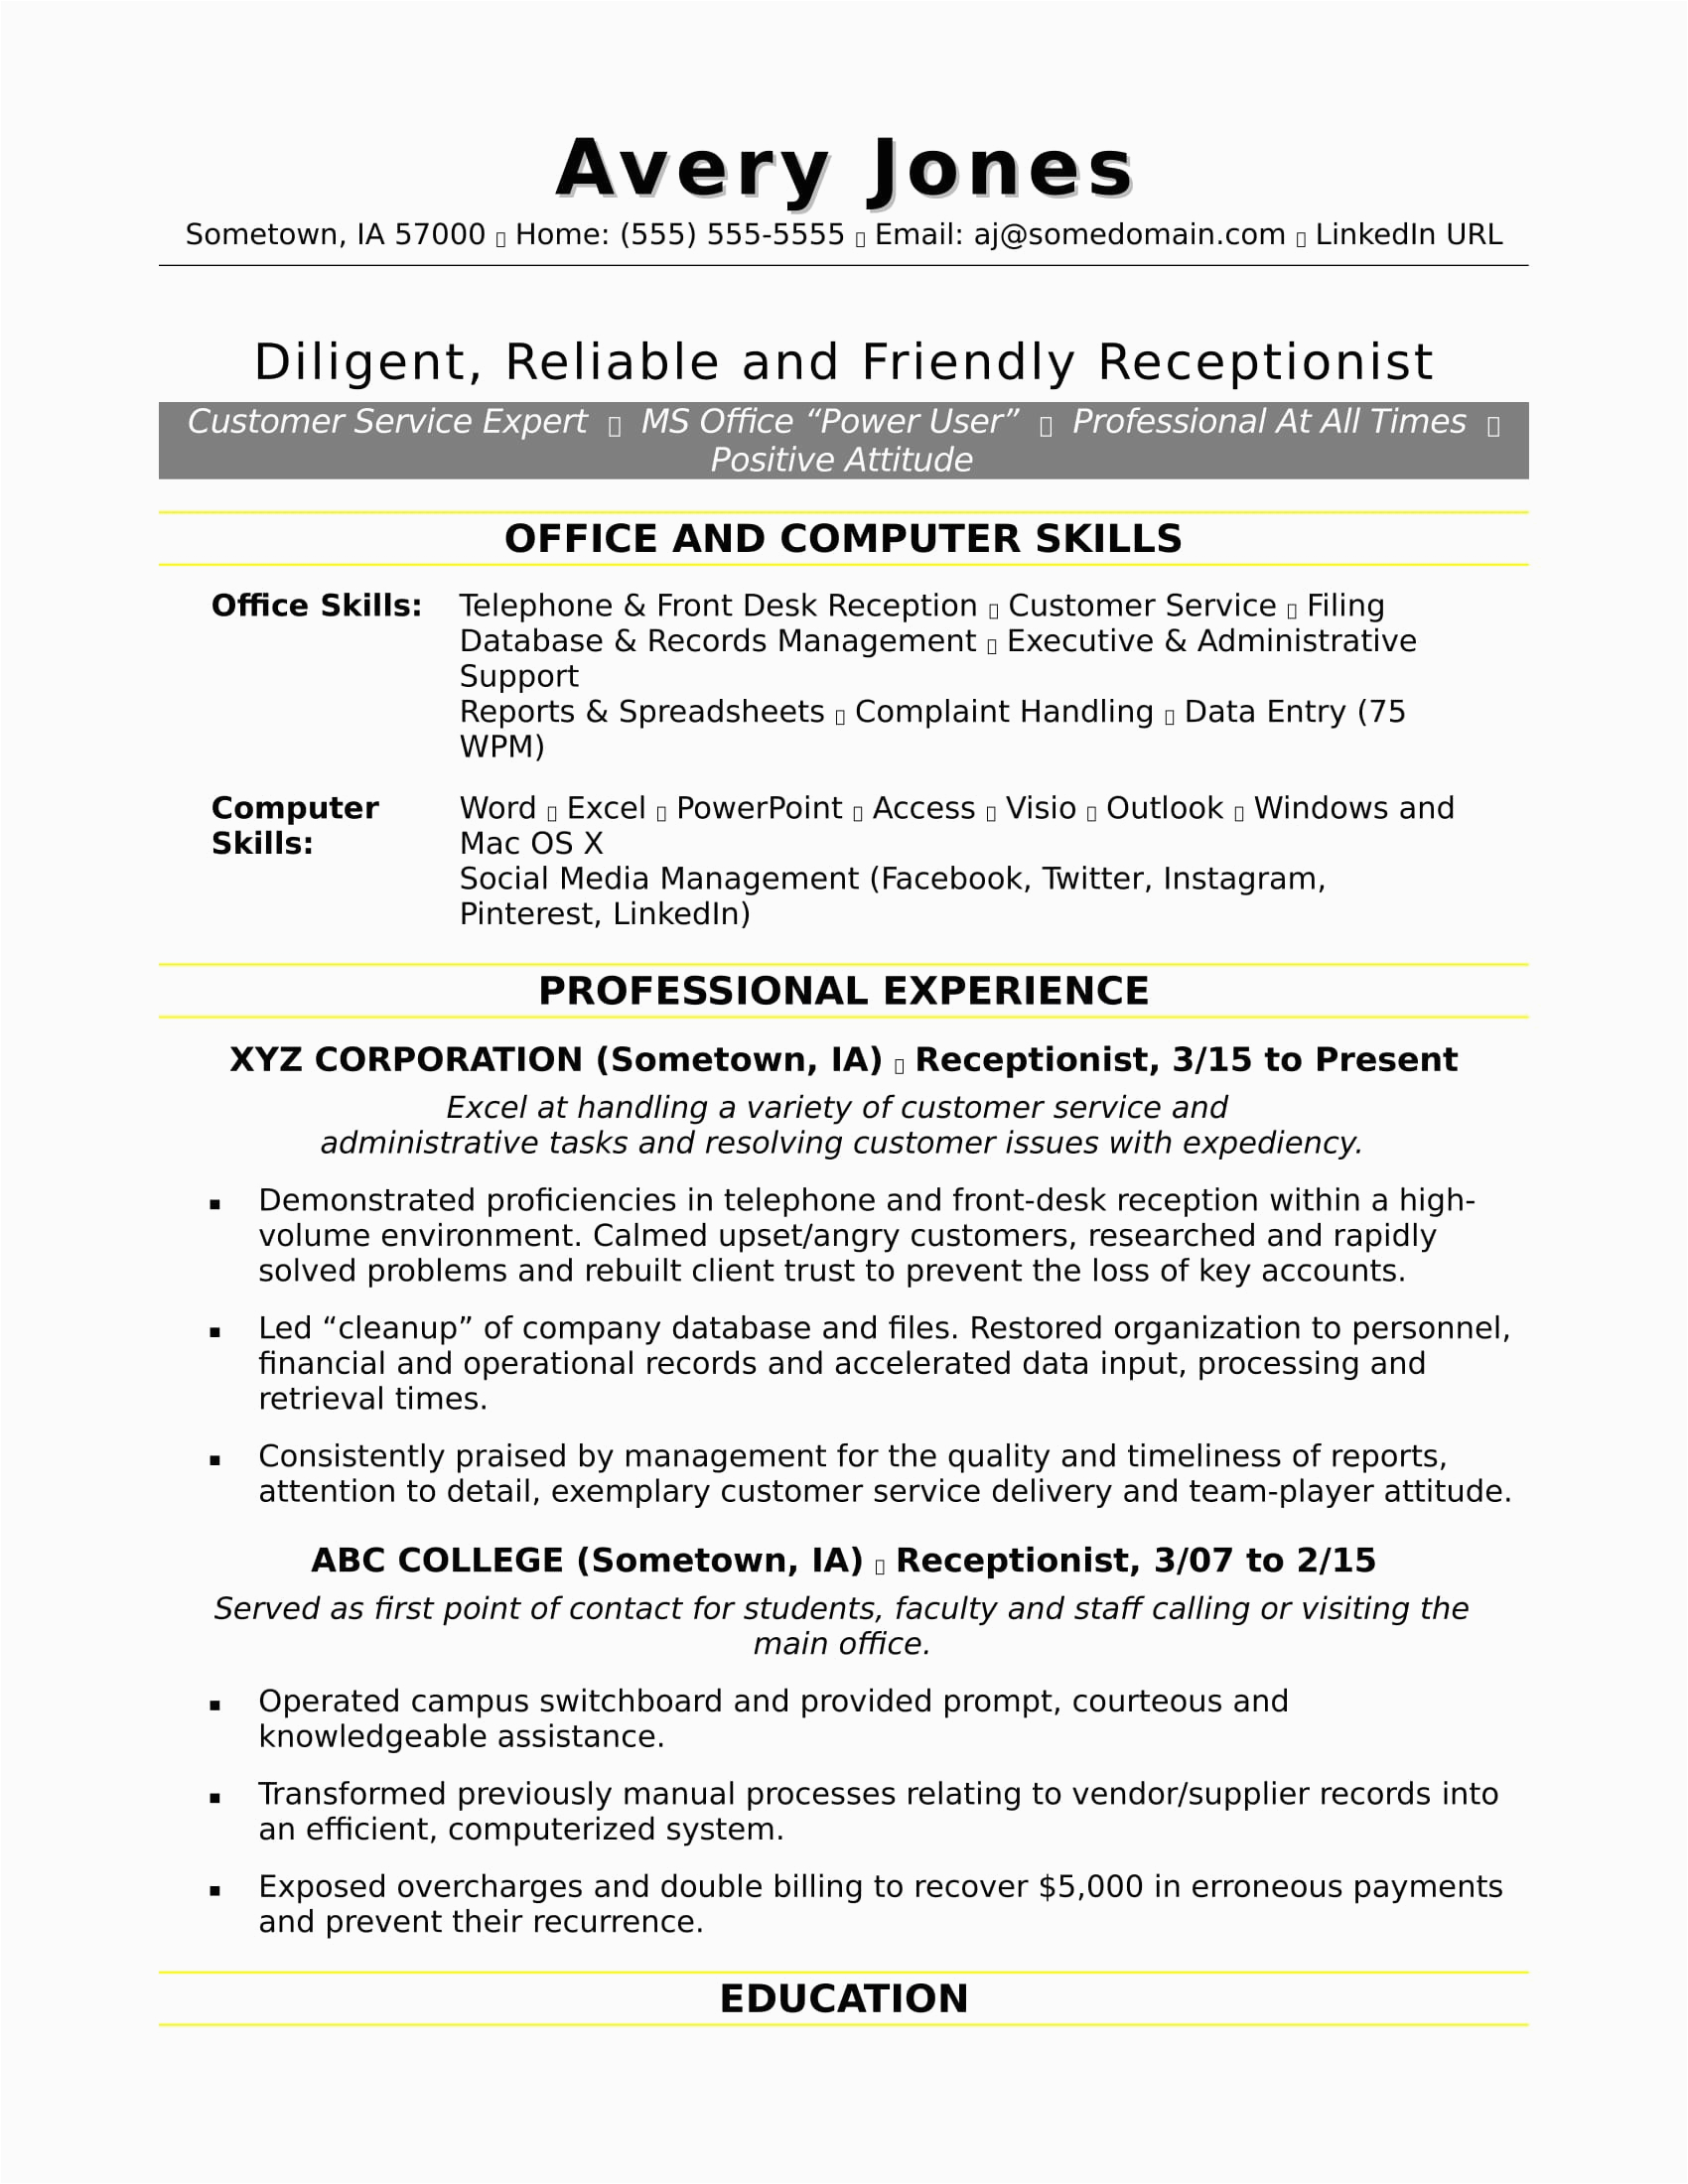 Resume Sample for Receptionist Position with No Experience Hotel Front Desk Jobs Nyc No Experience